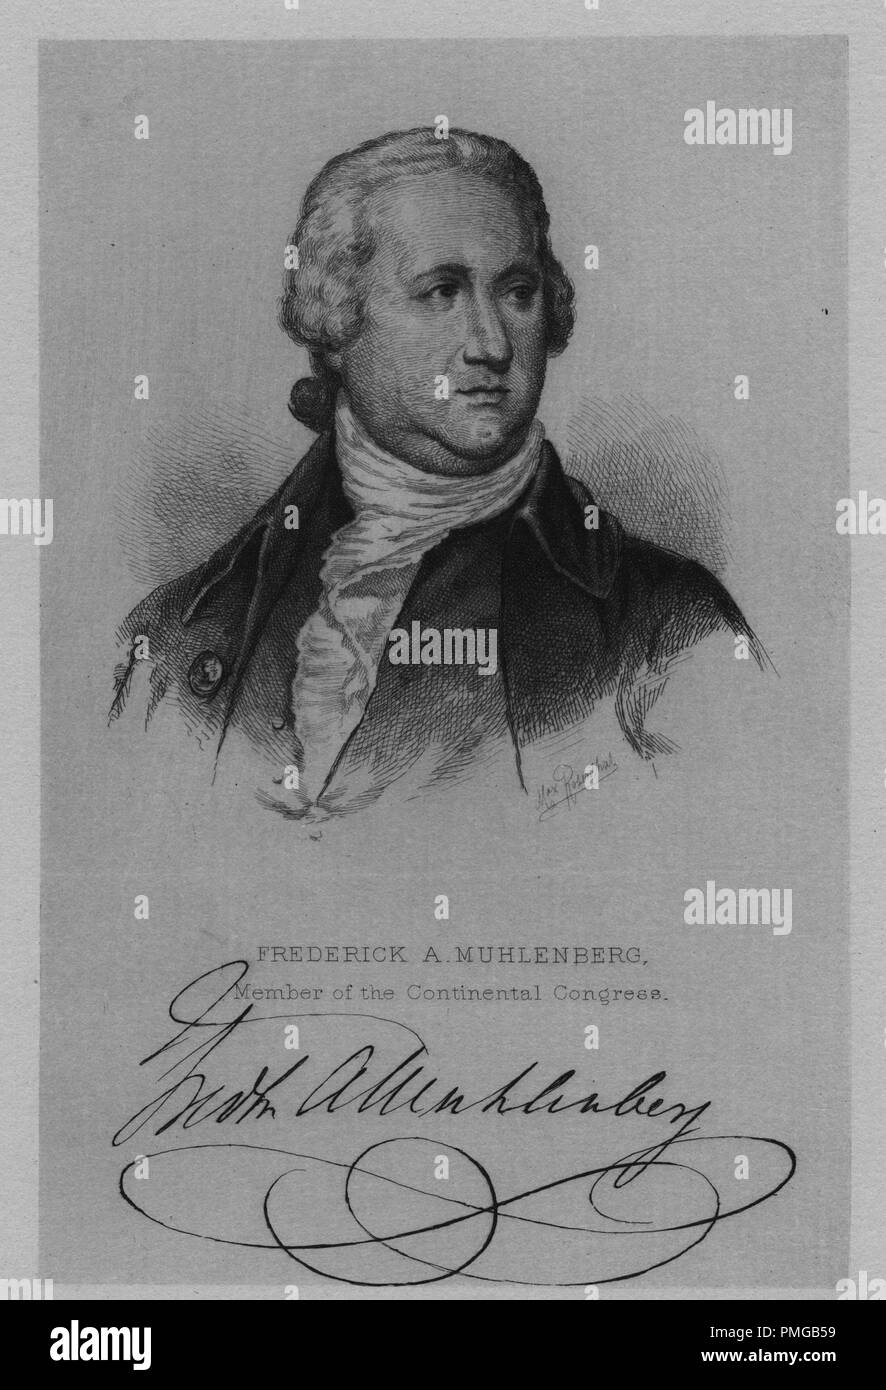 Engraved portrait of Frederick Augustus Muhlenberg, member of the Continental Congress from Pennsylvania, 1841. From the New York Public Library. () Stock Photo